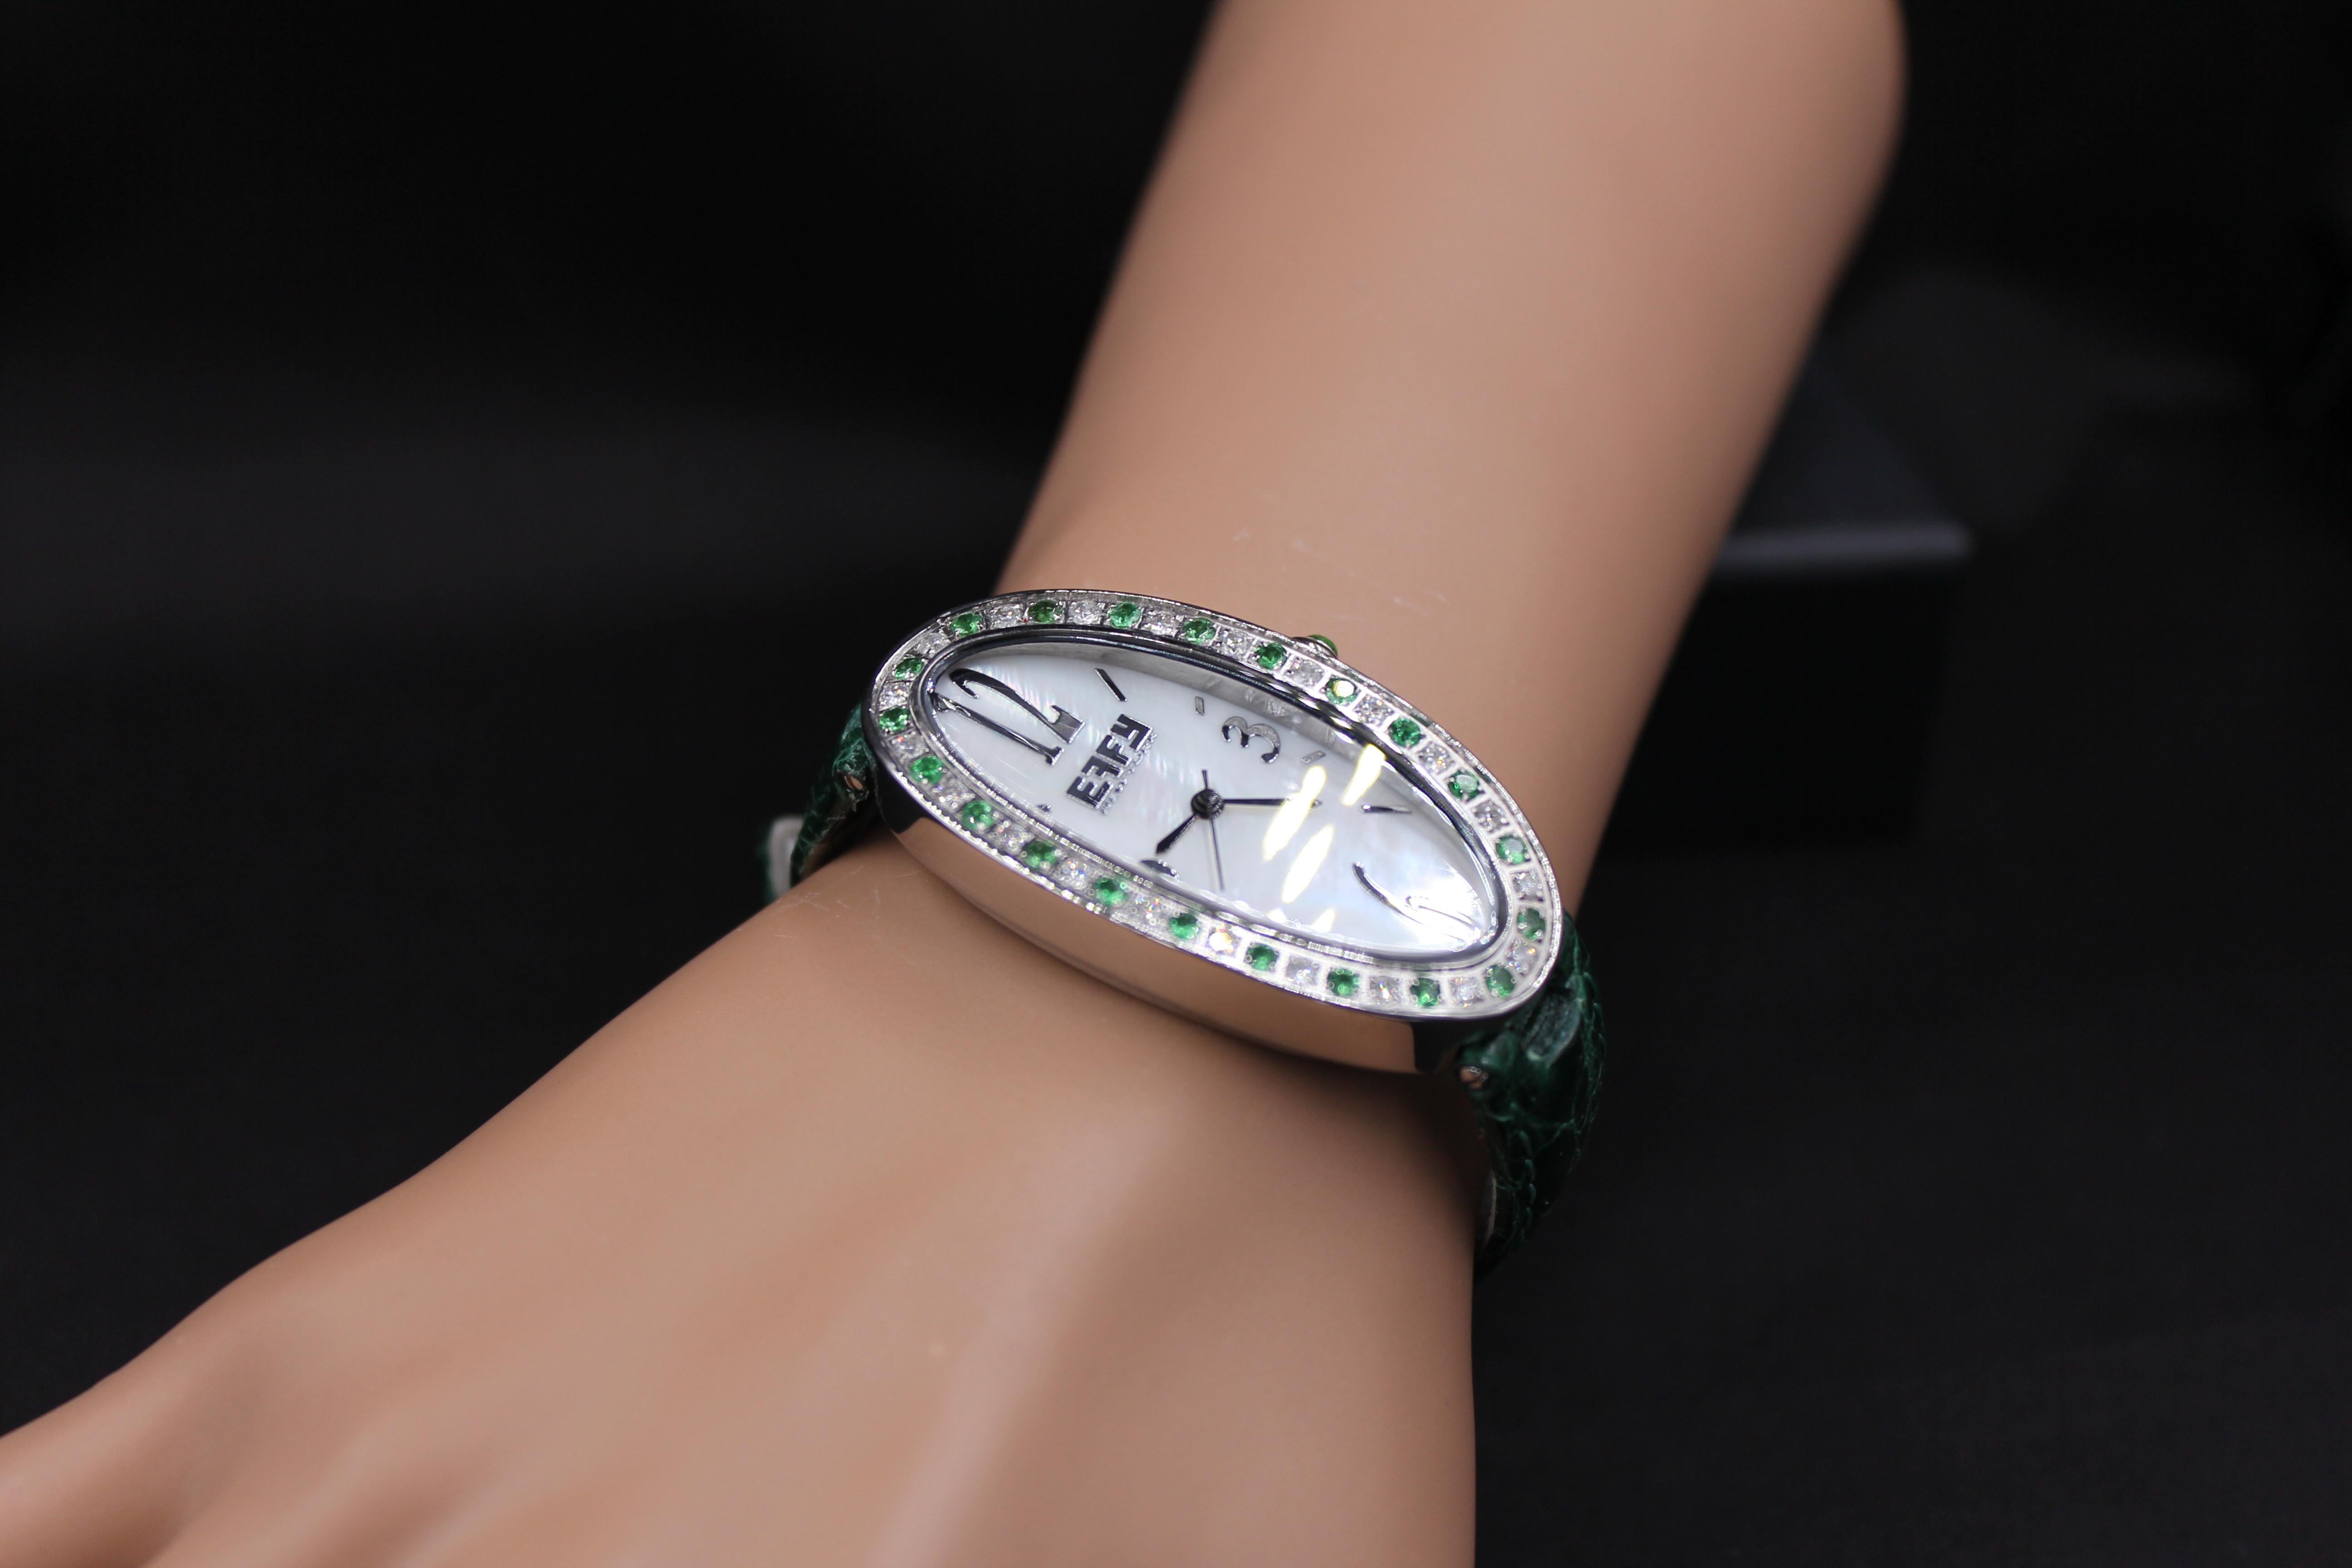 ·         Quality Swiss-Quartz movement guarantees precision timing
·         Mother-of-Pearl dial micro-paved with diamonds and gemstones enhances any dress style
·         Scratch-resistant sapphire glass lens
·         Genuine exotic crocodile